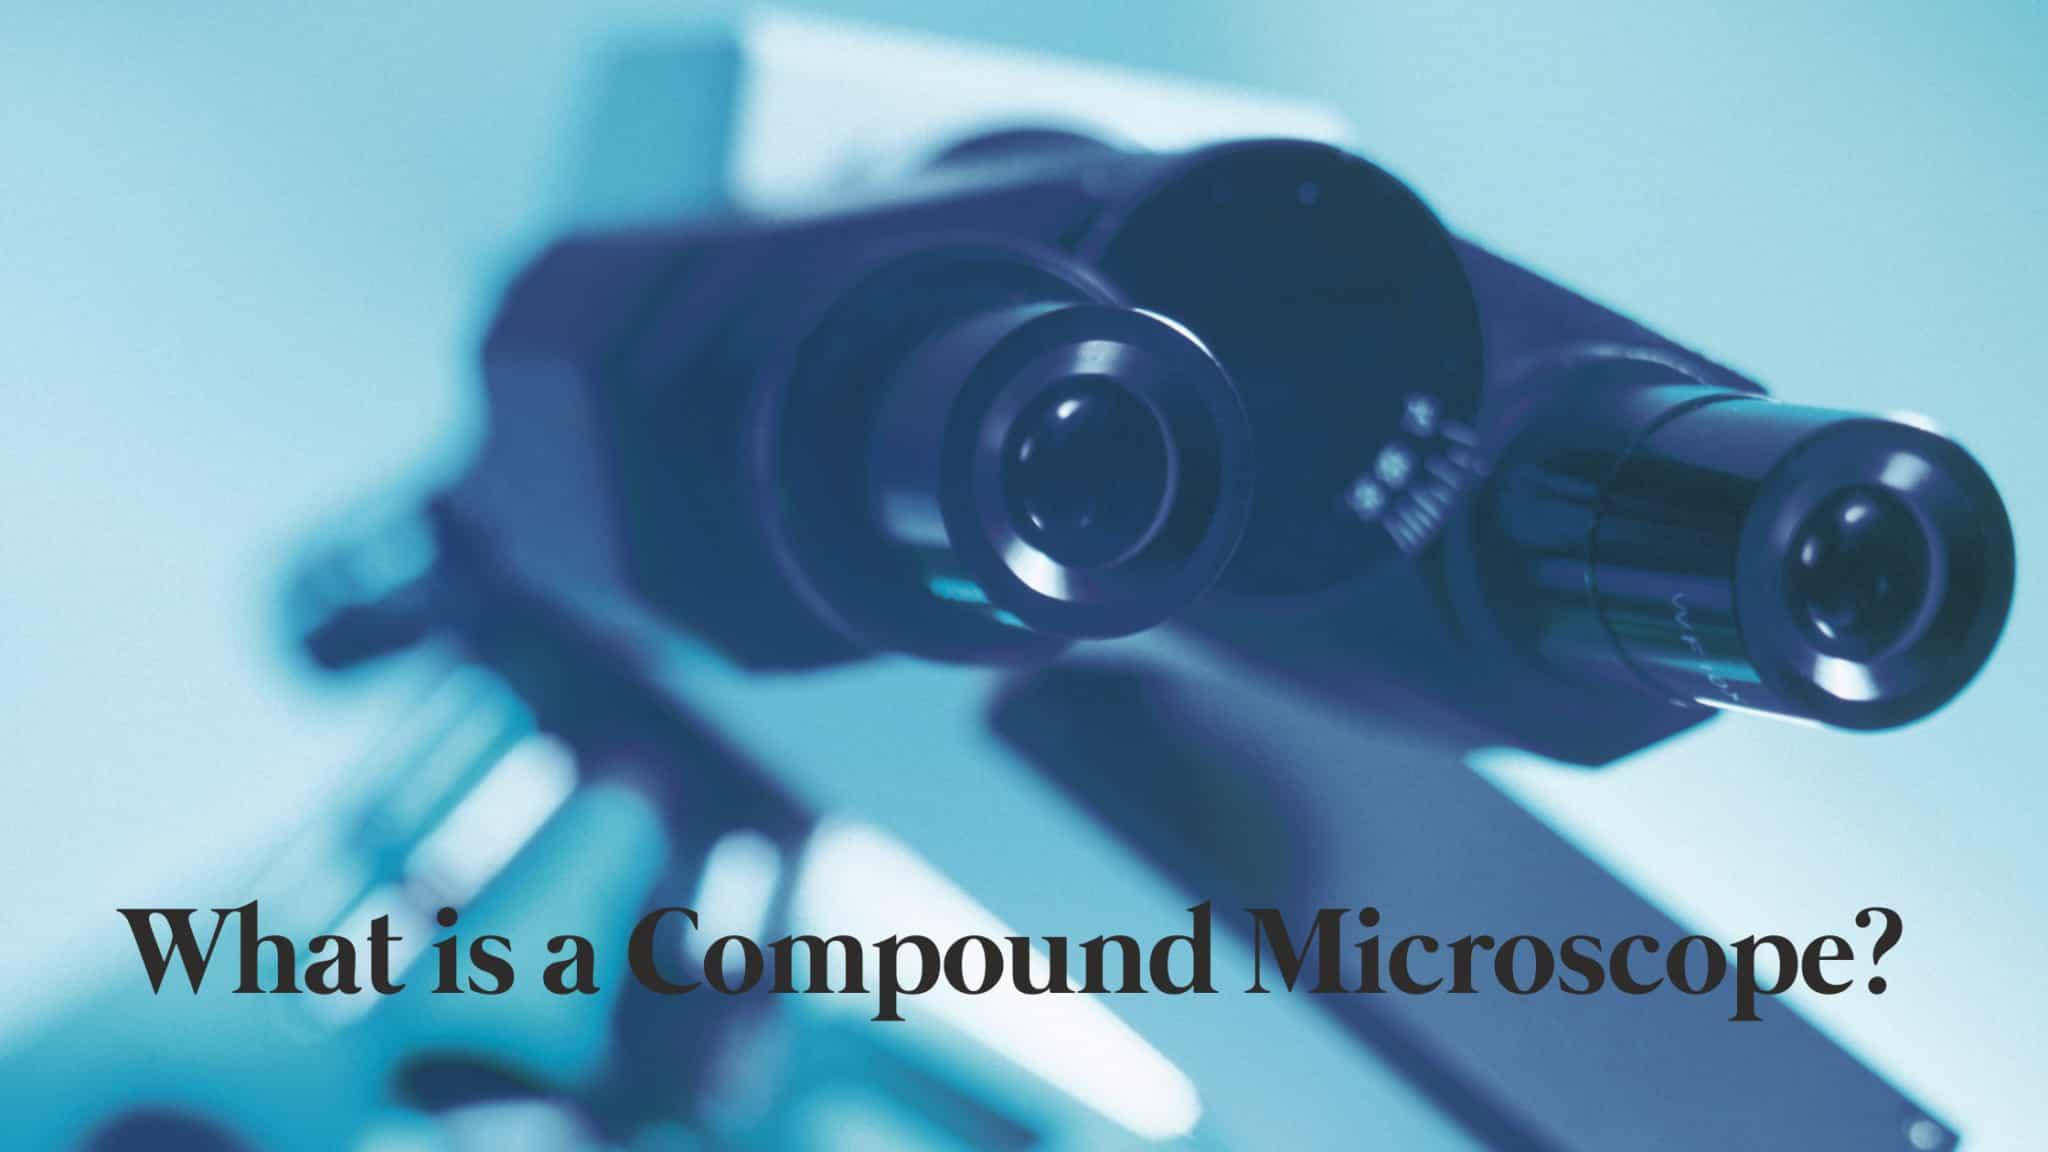 What Is a Compound Microscope?